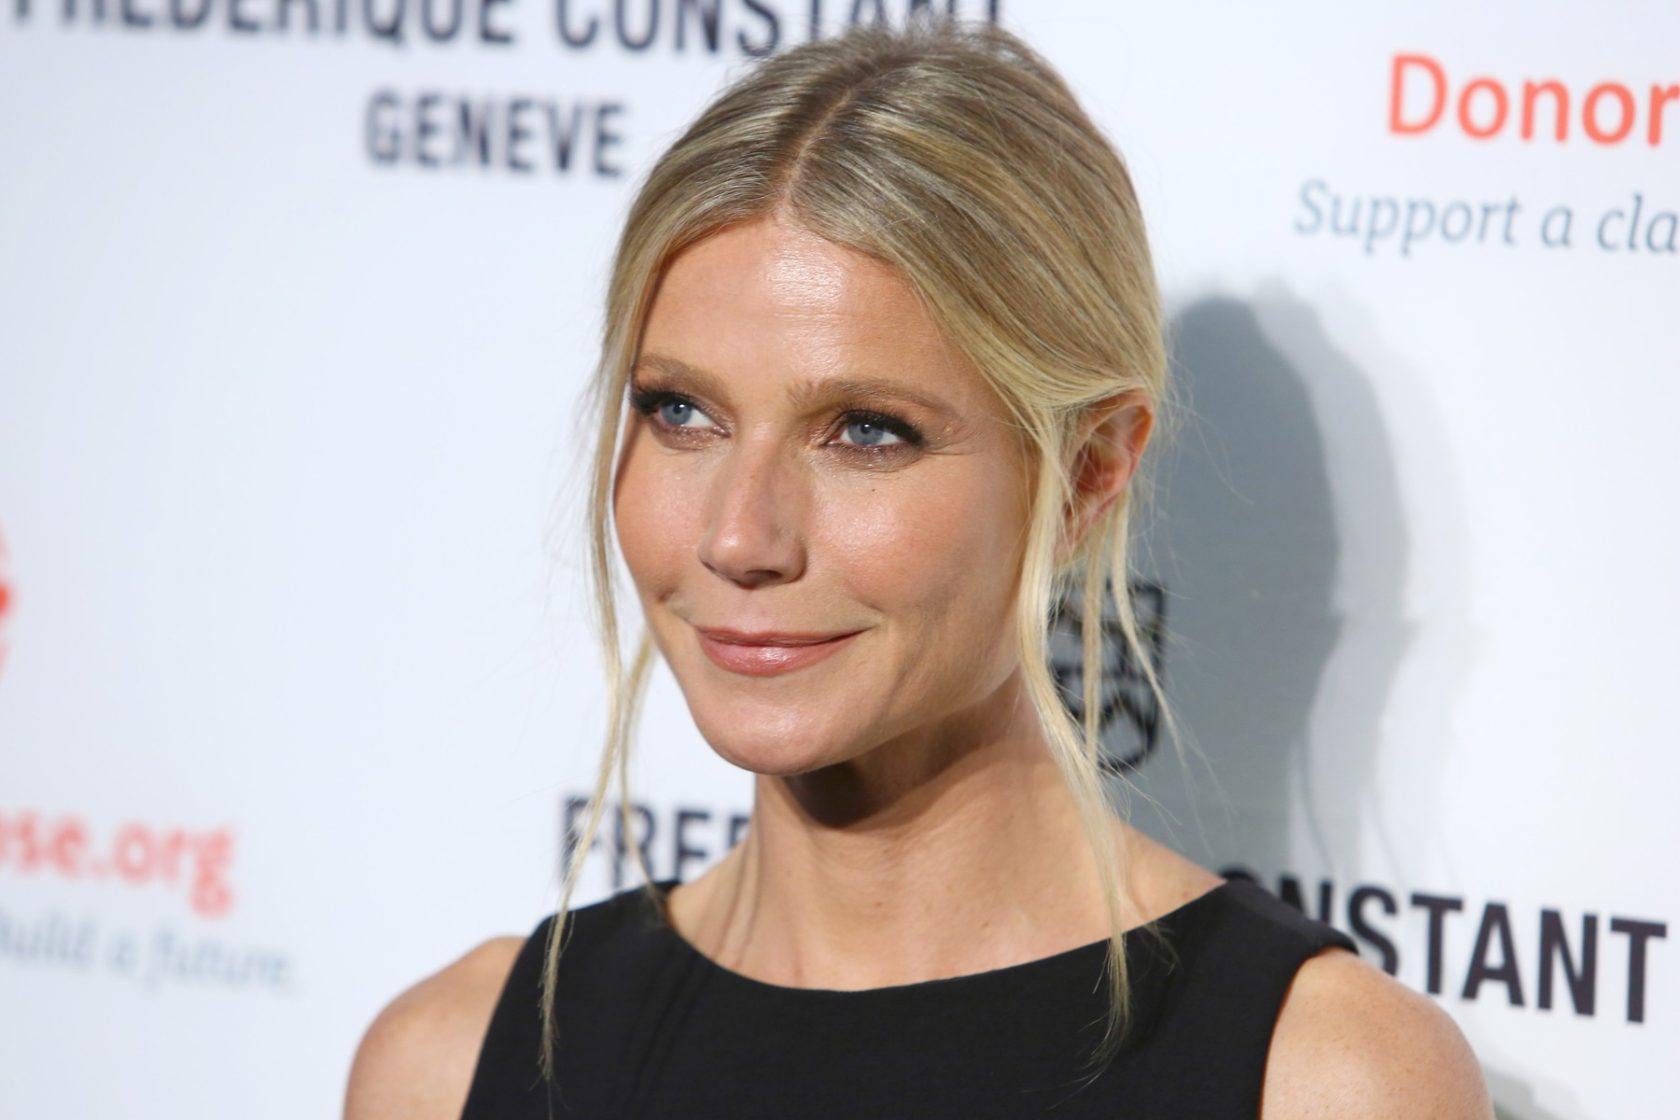 November 2 2016, New York City Actress Gwyneth Paltrow attends the Frederique Constant Horological Smartwatch launch at Spring Studios on November 2, 2016 in New York City. By Line: Philip Vaughan/ACE Pictures ACE Pictures Inc Tel: 6467670430 Email: info@acepixs.com, Image: 304619202, License: Rights-managed, Restrictions: , Model Release: no, Credit line: Profimedia, Acepixs